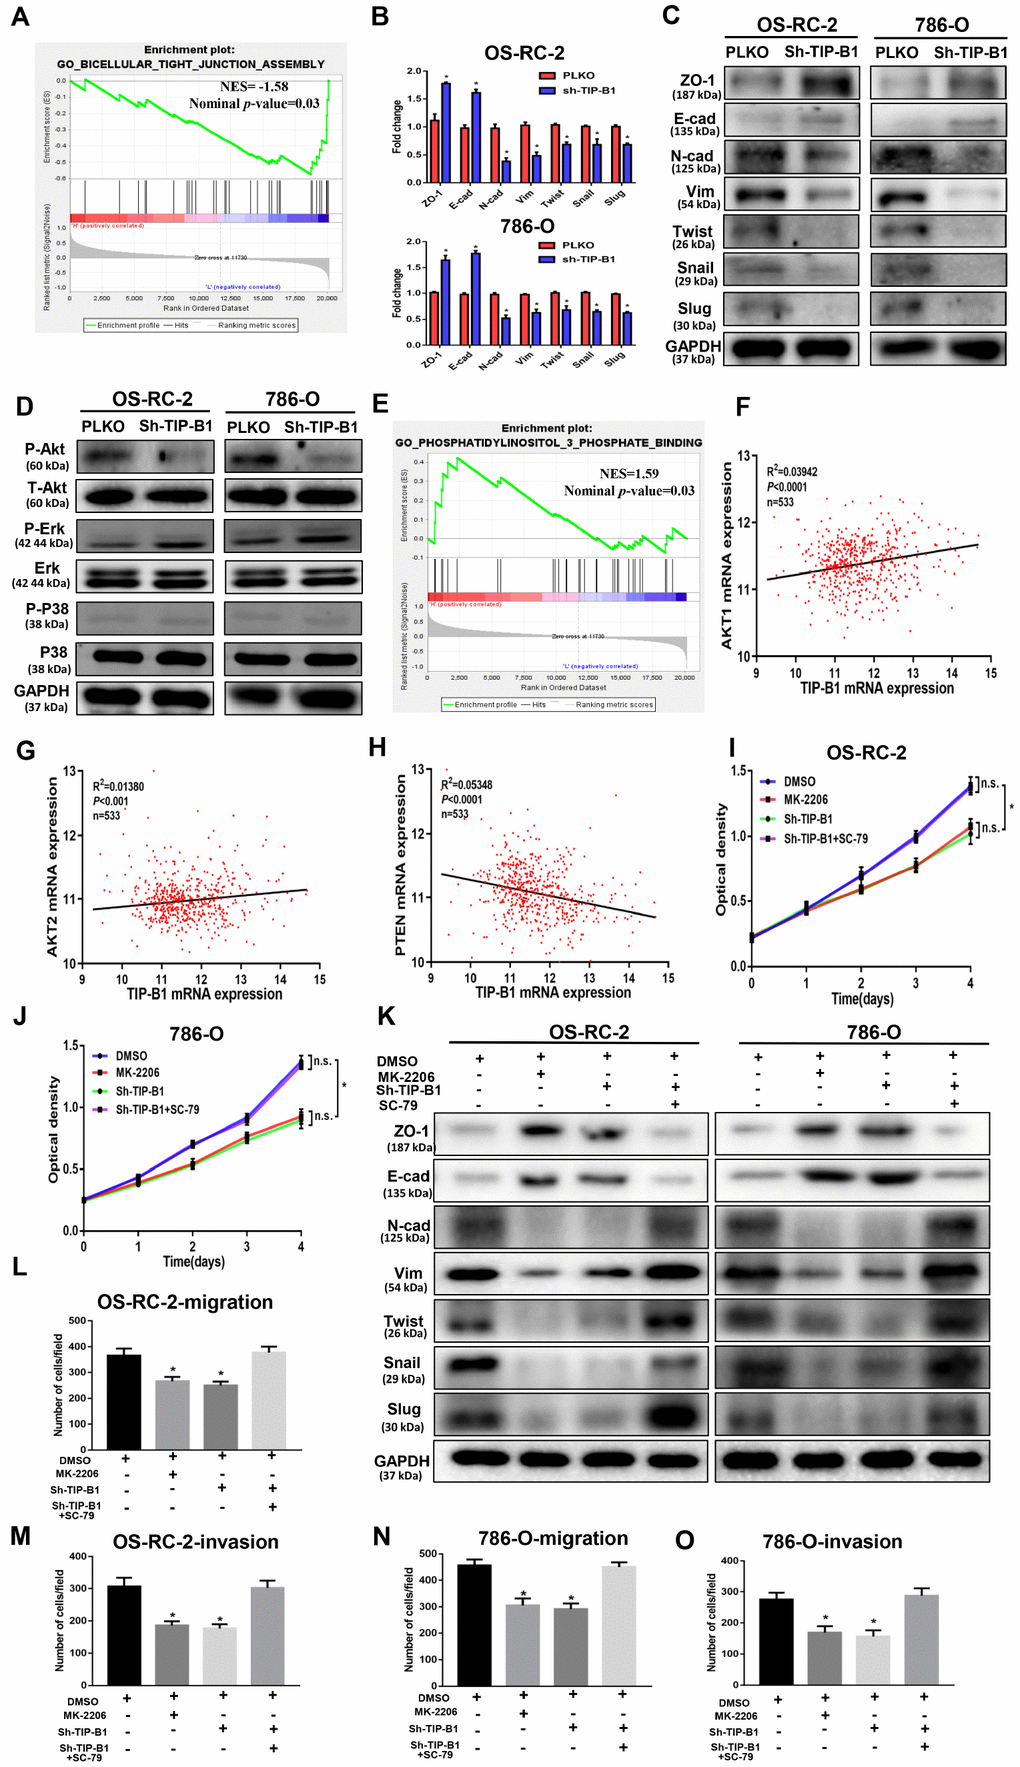 TIP-B1 trigger epithelial-mesenchymal transition by activating the AKT pathway. (A) GSEA analyses detected the tight junction markers were enriched in the TIP-B1 low group. (B–C) Expressions of EMT-related markers in KIRC cells with TIP-B1 downregulation by RT-PCR (B) and WB (C) assays. (D) Western blot assays detect candidate signal pathway. (E) GSEA analyses detected the AKT signal were enriched in TIP-B1 high group. (F–H) Correlation analysis between TIP-B1 and AKT1 (F), AKT2 (G), PTEN (H) in TCGA database. (I–J) Proliferation in the in OSRC-2 (I) and 786-O (J) cell lines was evaluated by CCK-8 assay. (K) Expressions of EMT-related markers in the indicated KIRC cells were detected by western blot assay. (L-O) Transwell migration (L, N) and invasion (M, O) assay was evaluated in indicated groups.